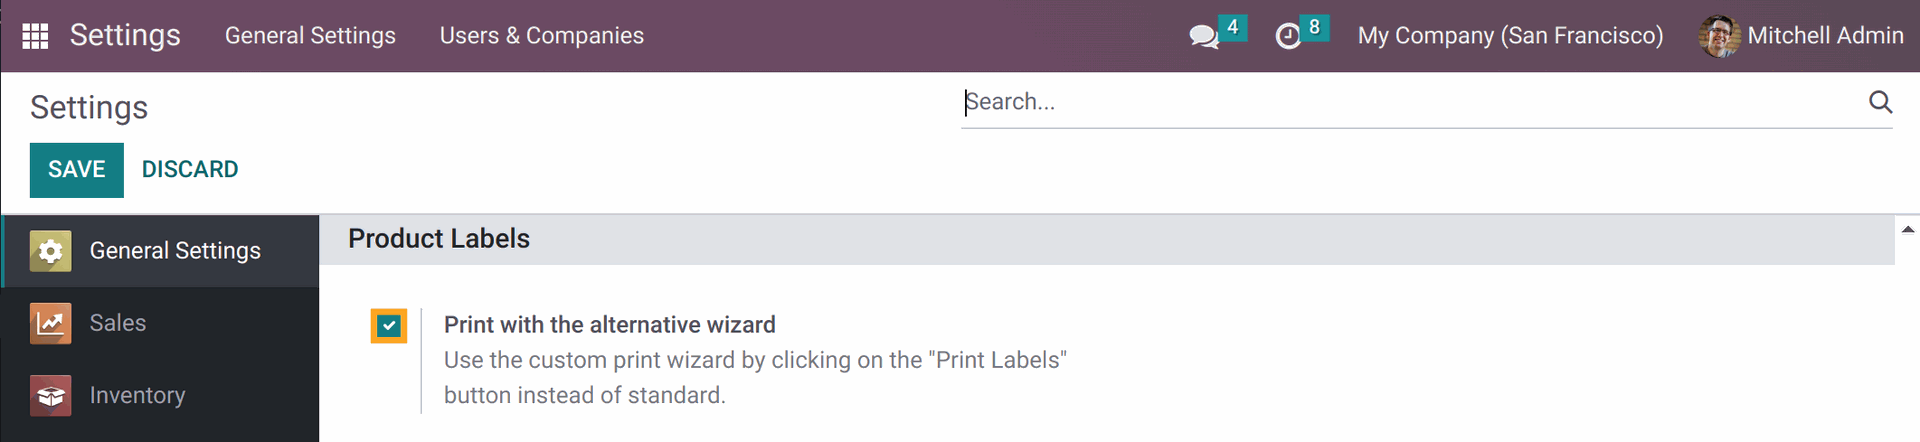 Odoo print product labels by alternative print wizard in 16.0